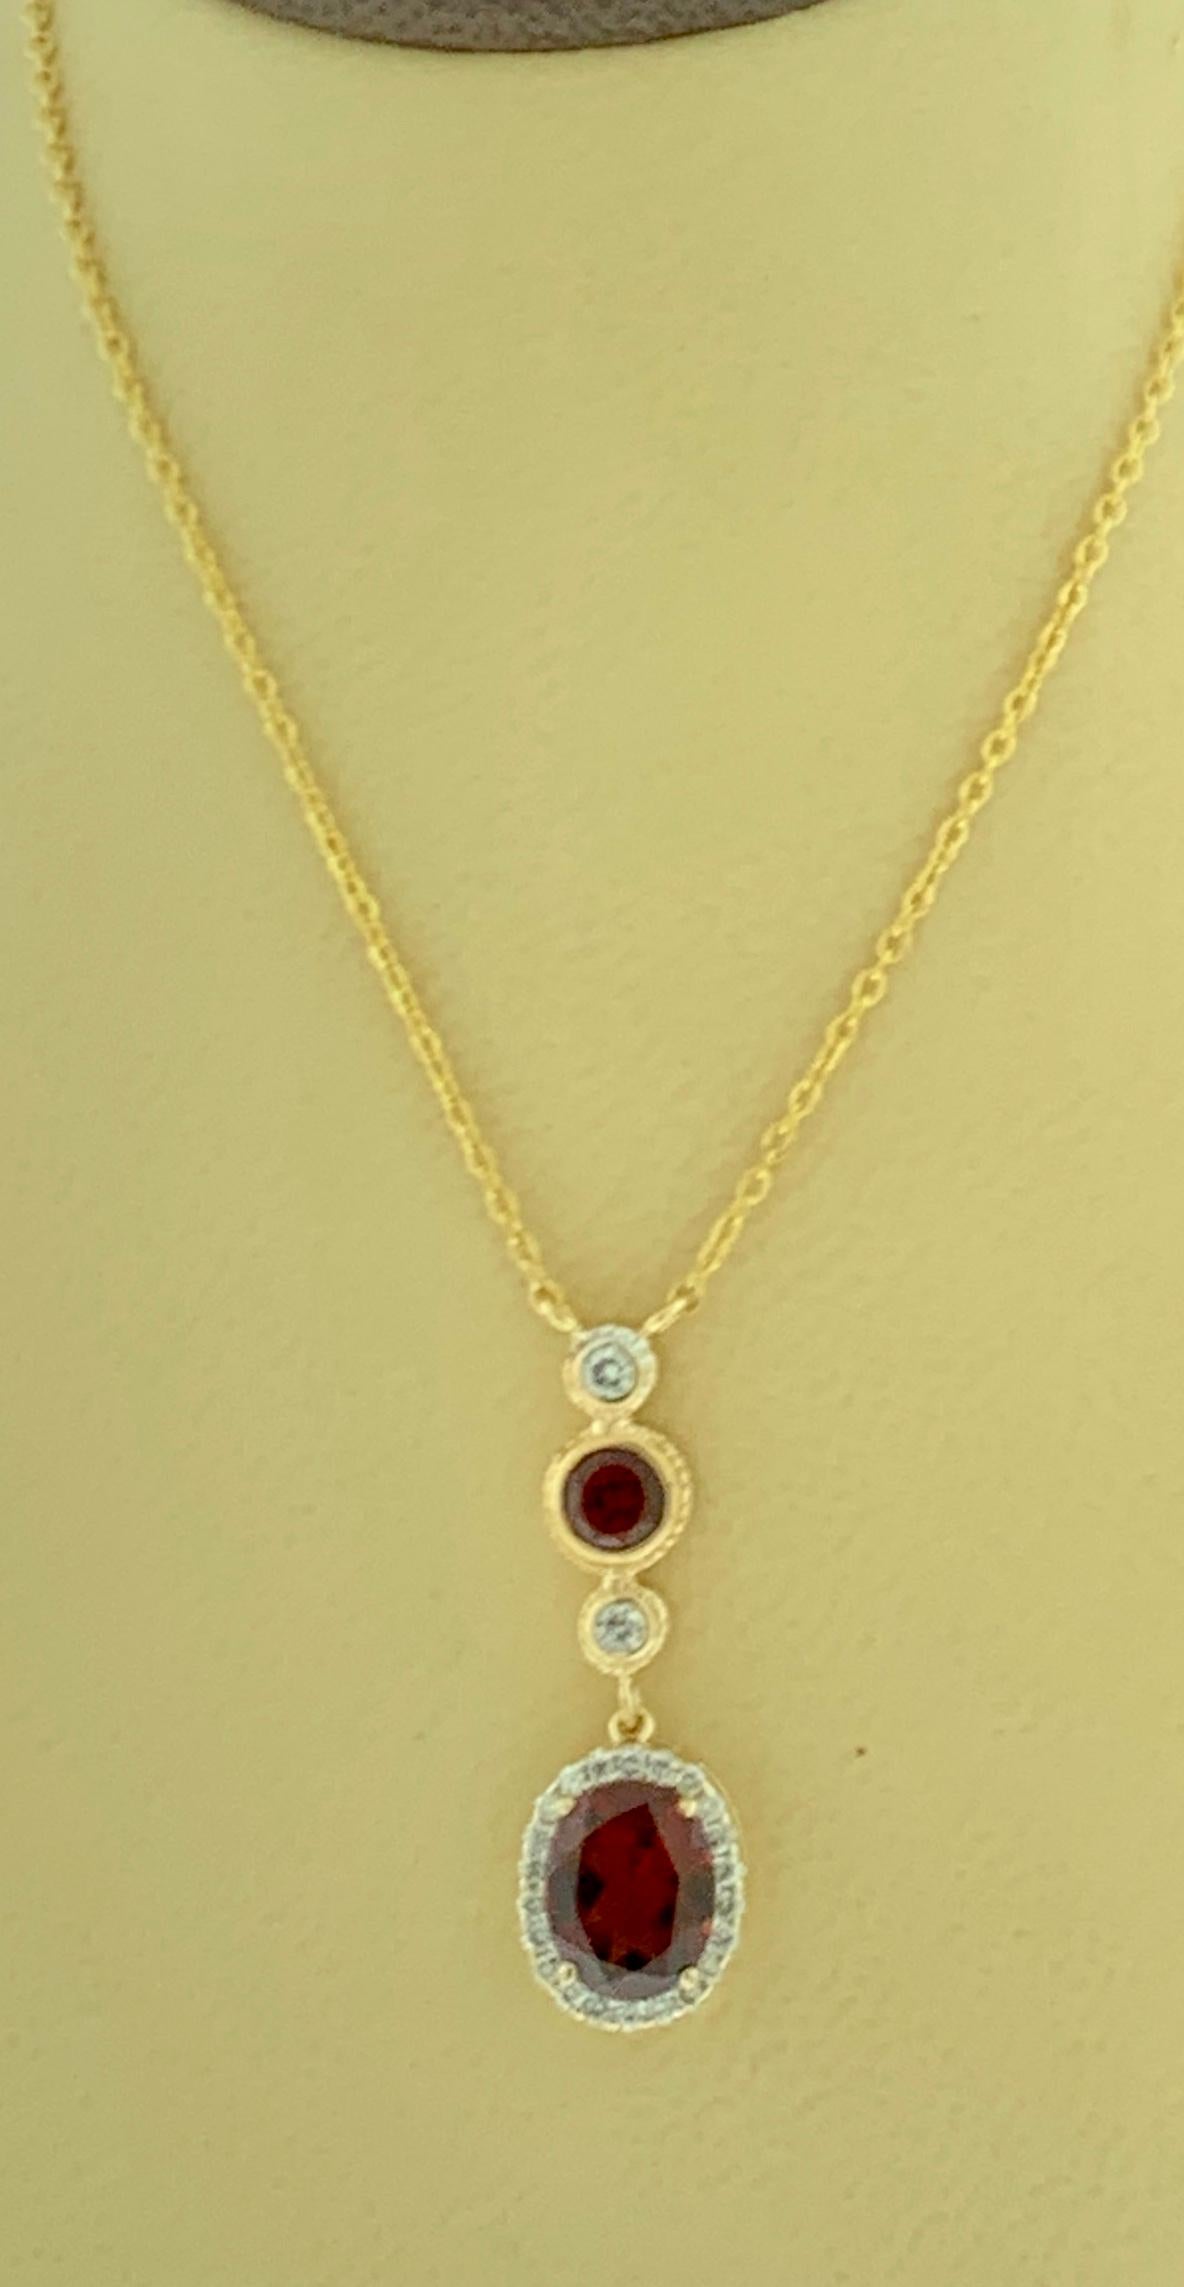 6 Carat Oval Shape Garnet and 0.6 Carat Diamond Necklace in 14 Karat Yellow Gold For Sale 3